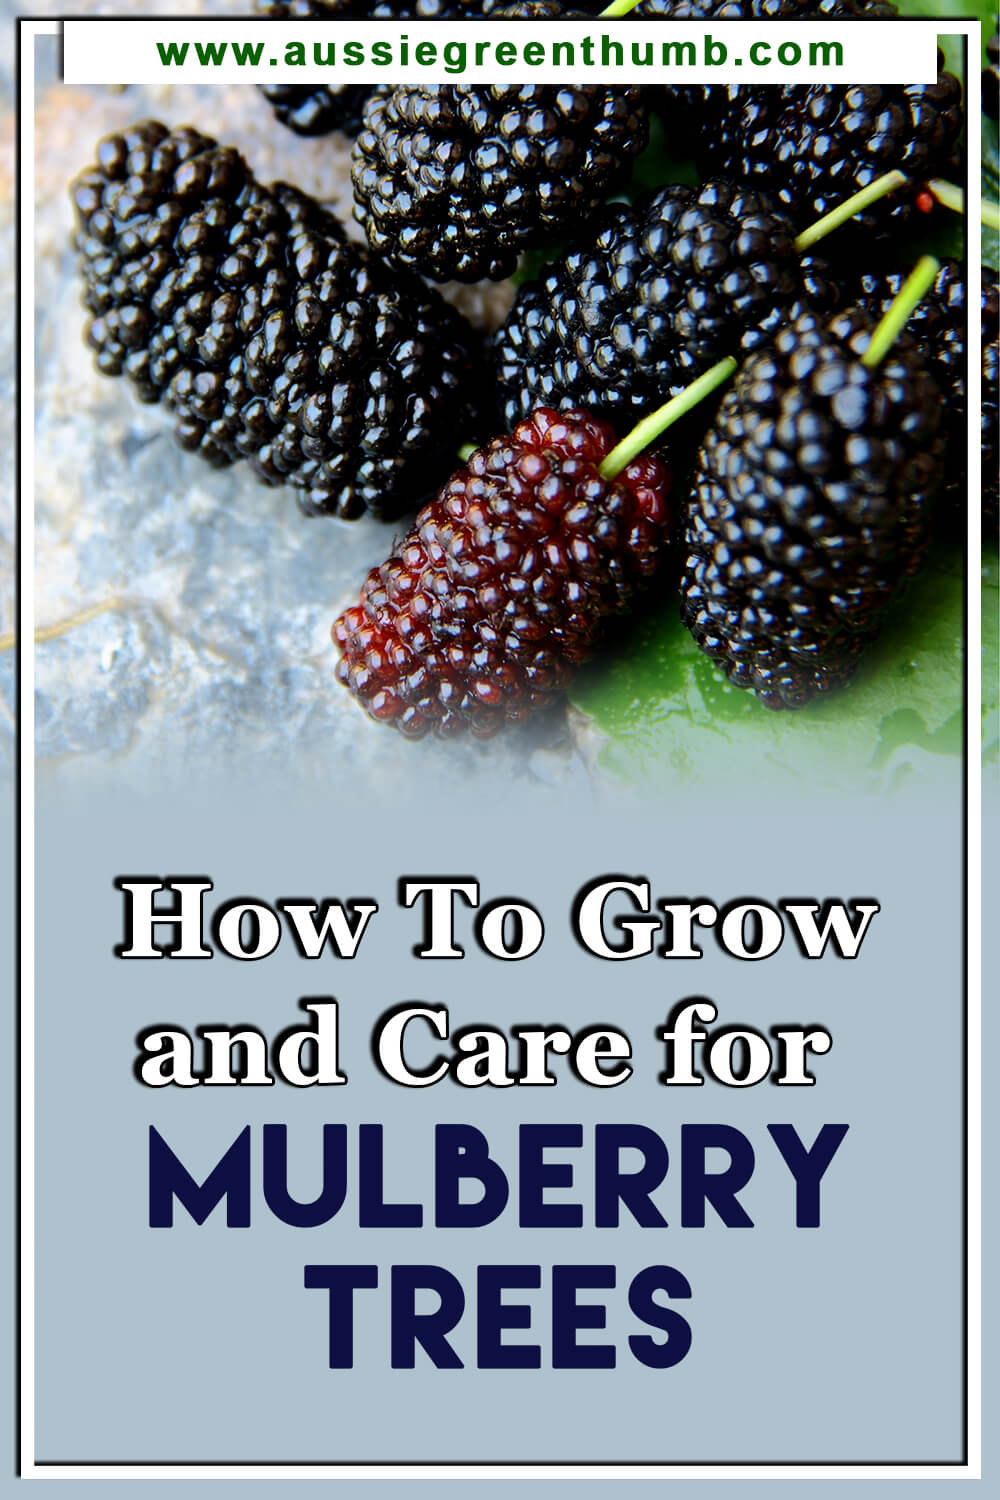 How To Grow and Care for Mulberry Trees